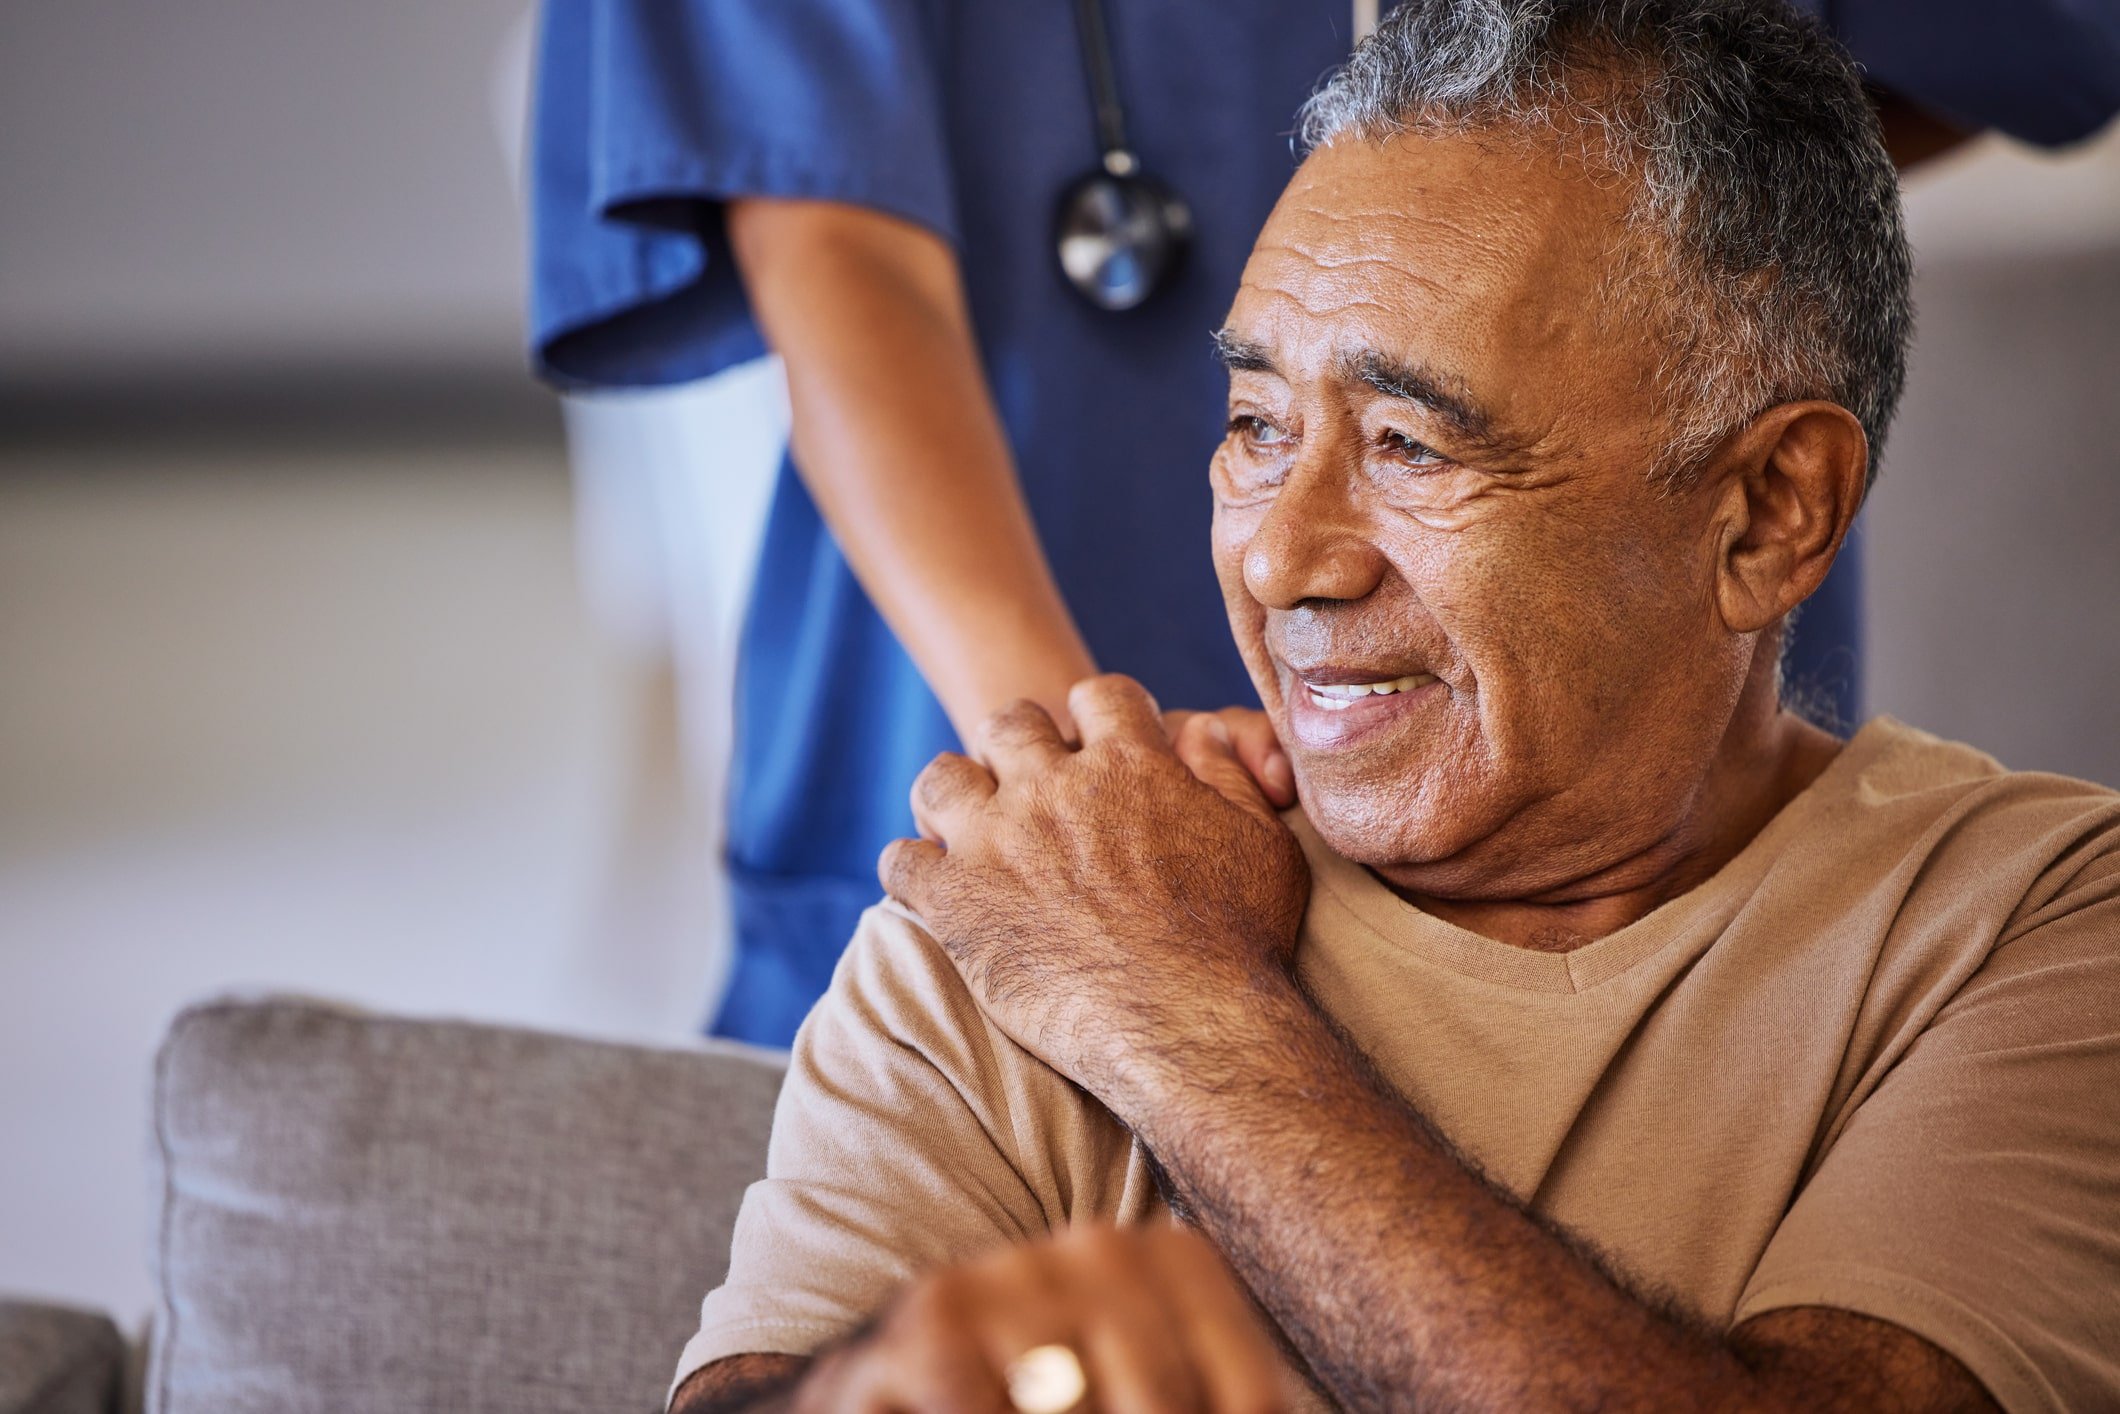 Value-based Care Solutions: Advance Care Planning